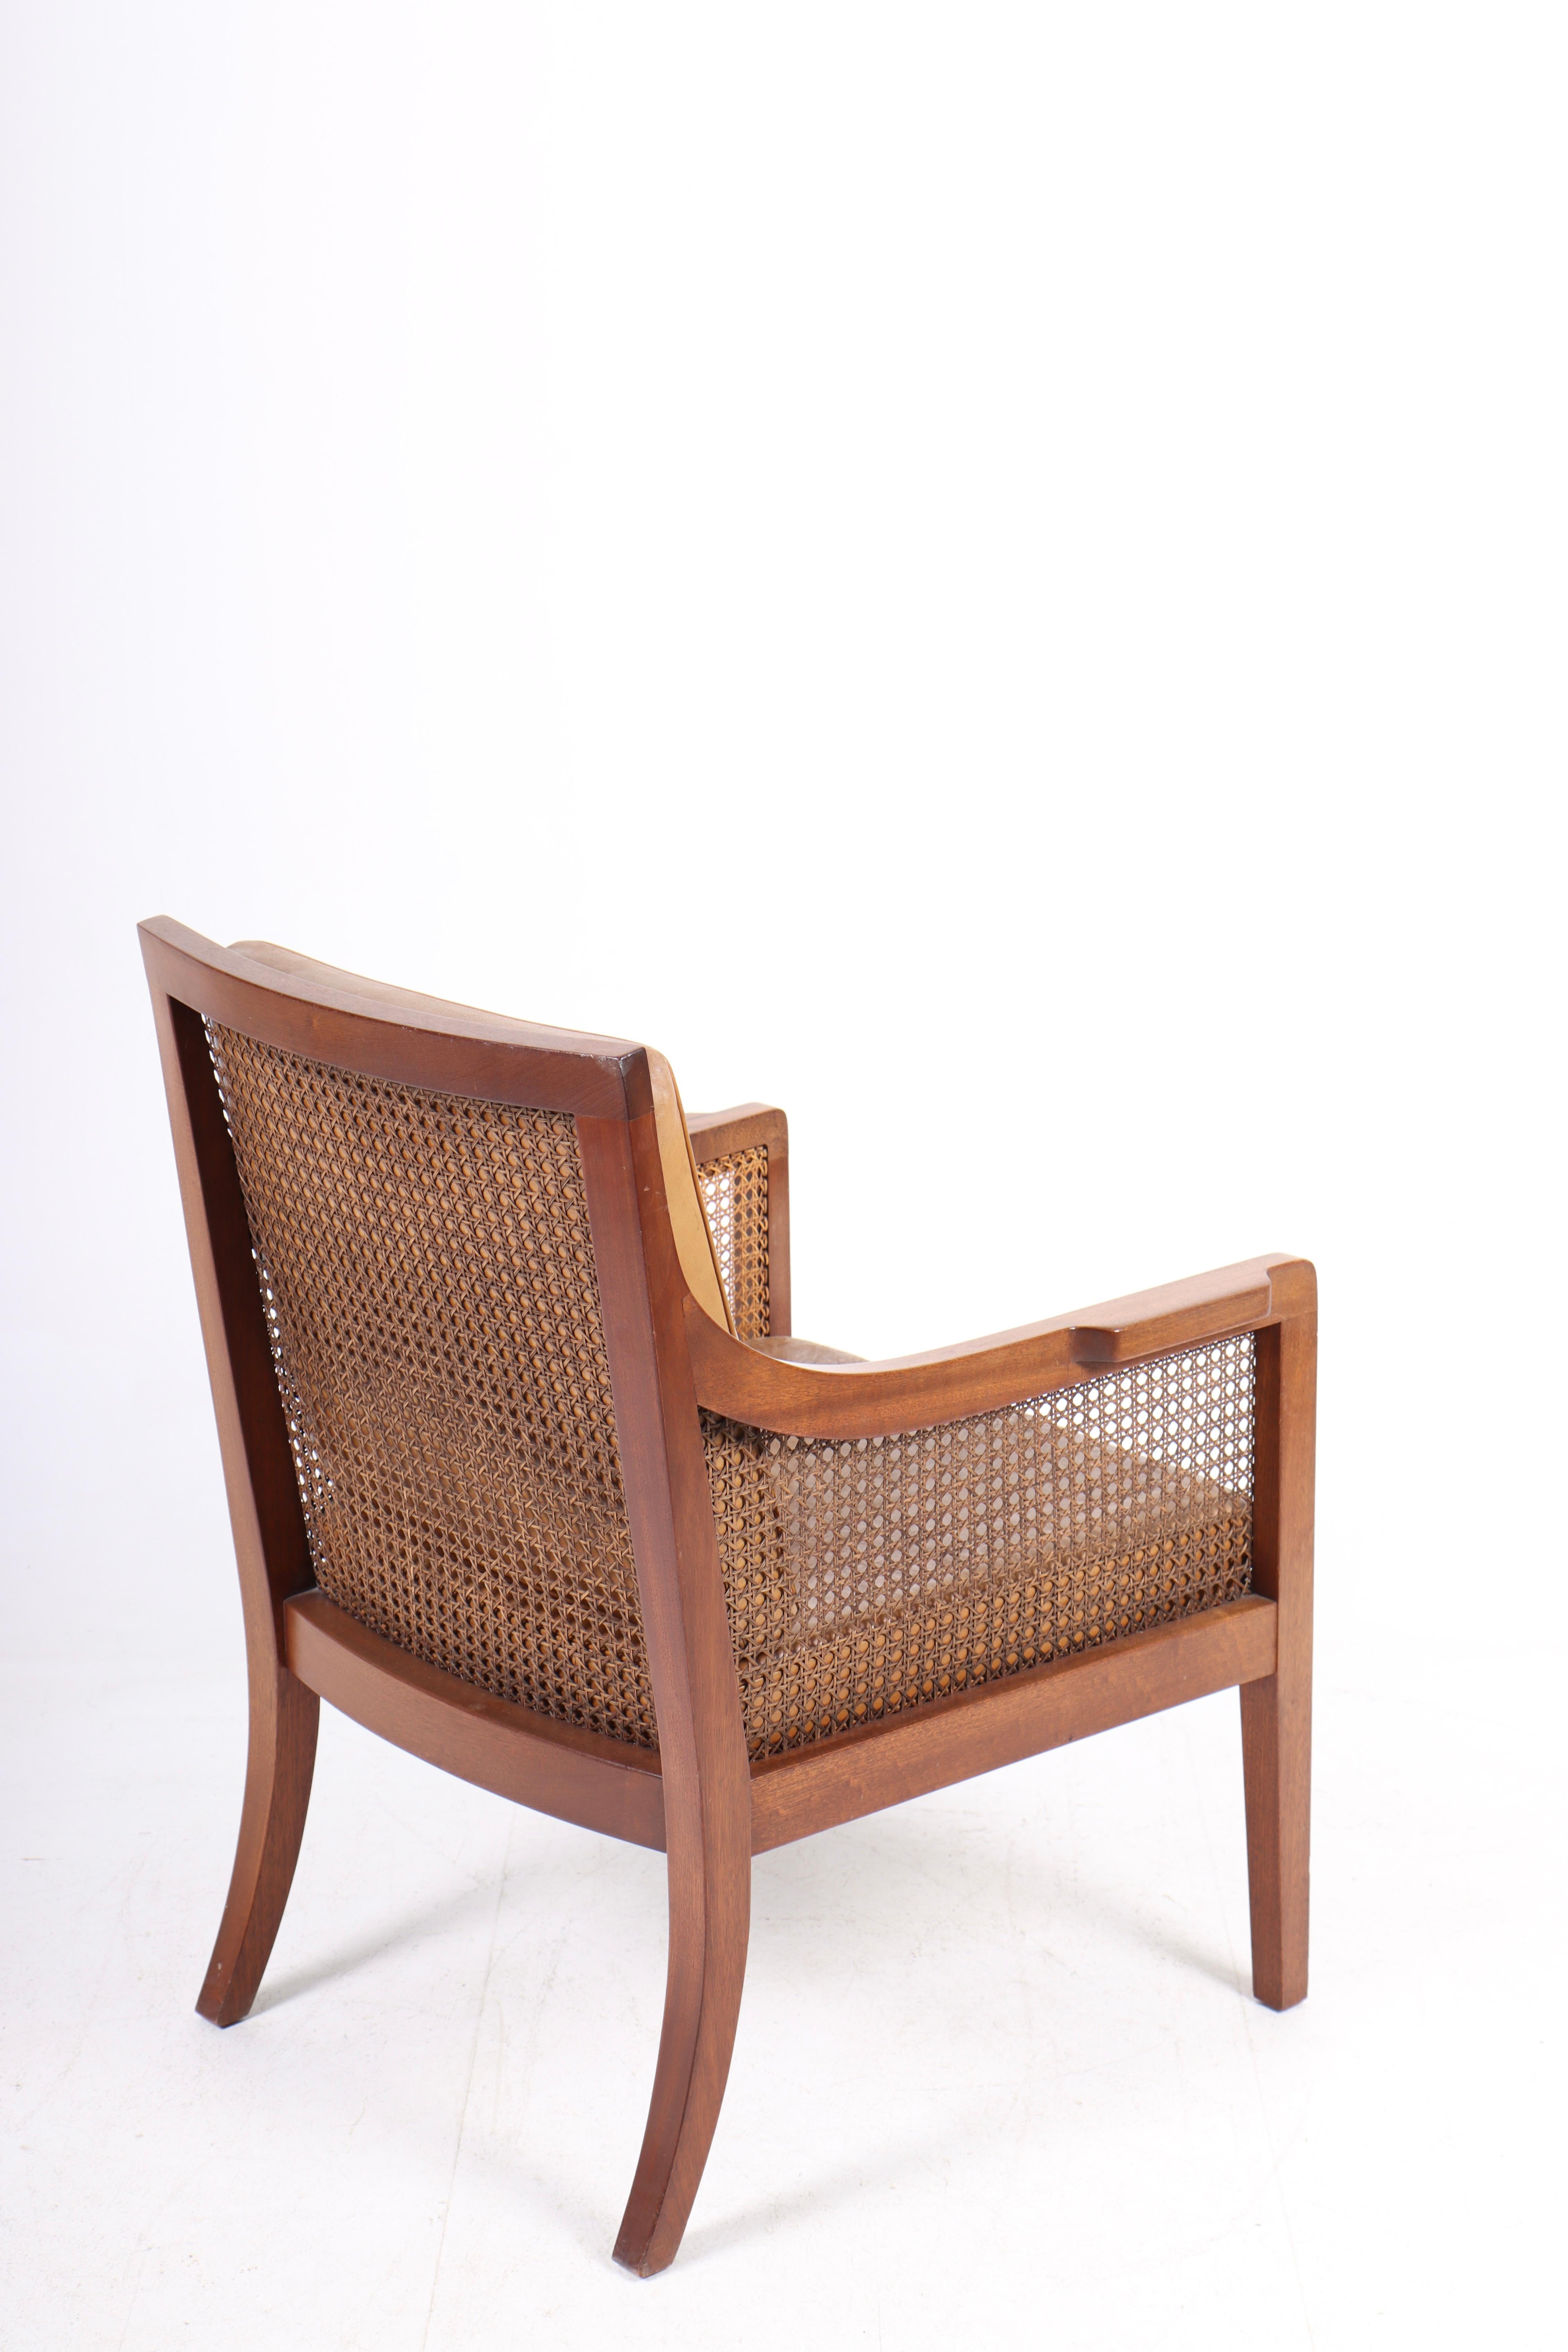 Mid-20th Century Classic Lounge Chair in Mahogany and French Cane, Made in Denmark 1940s